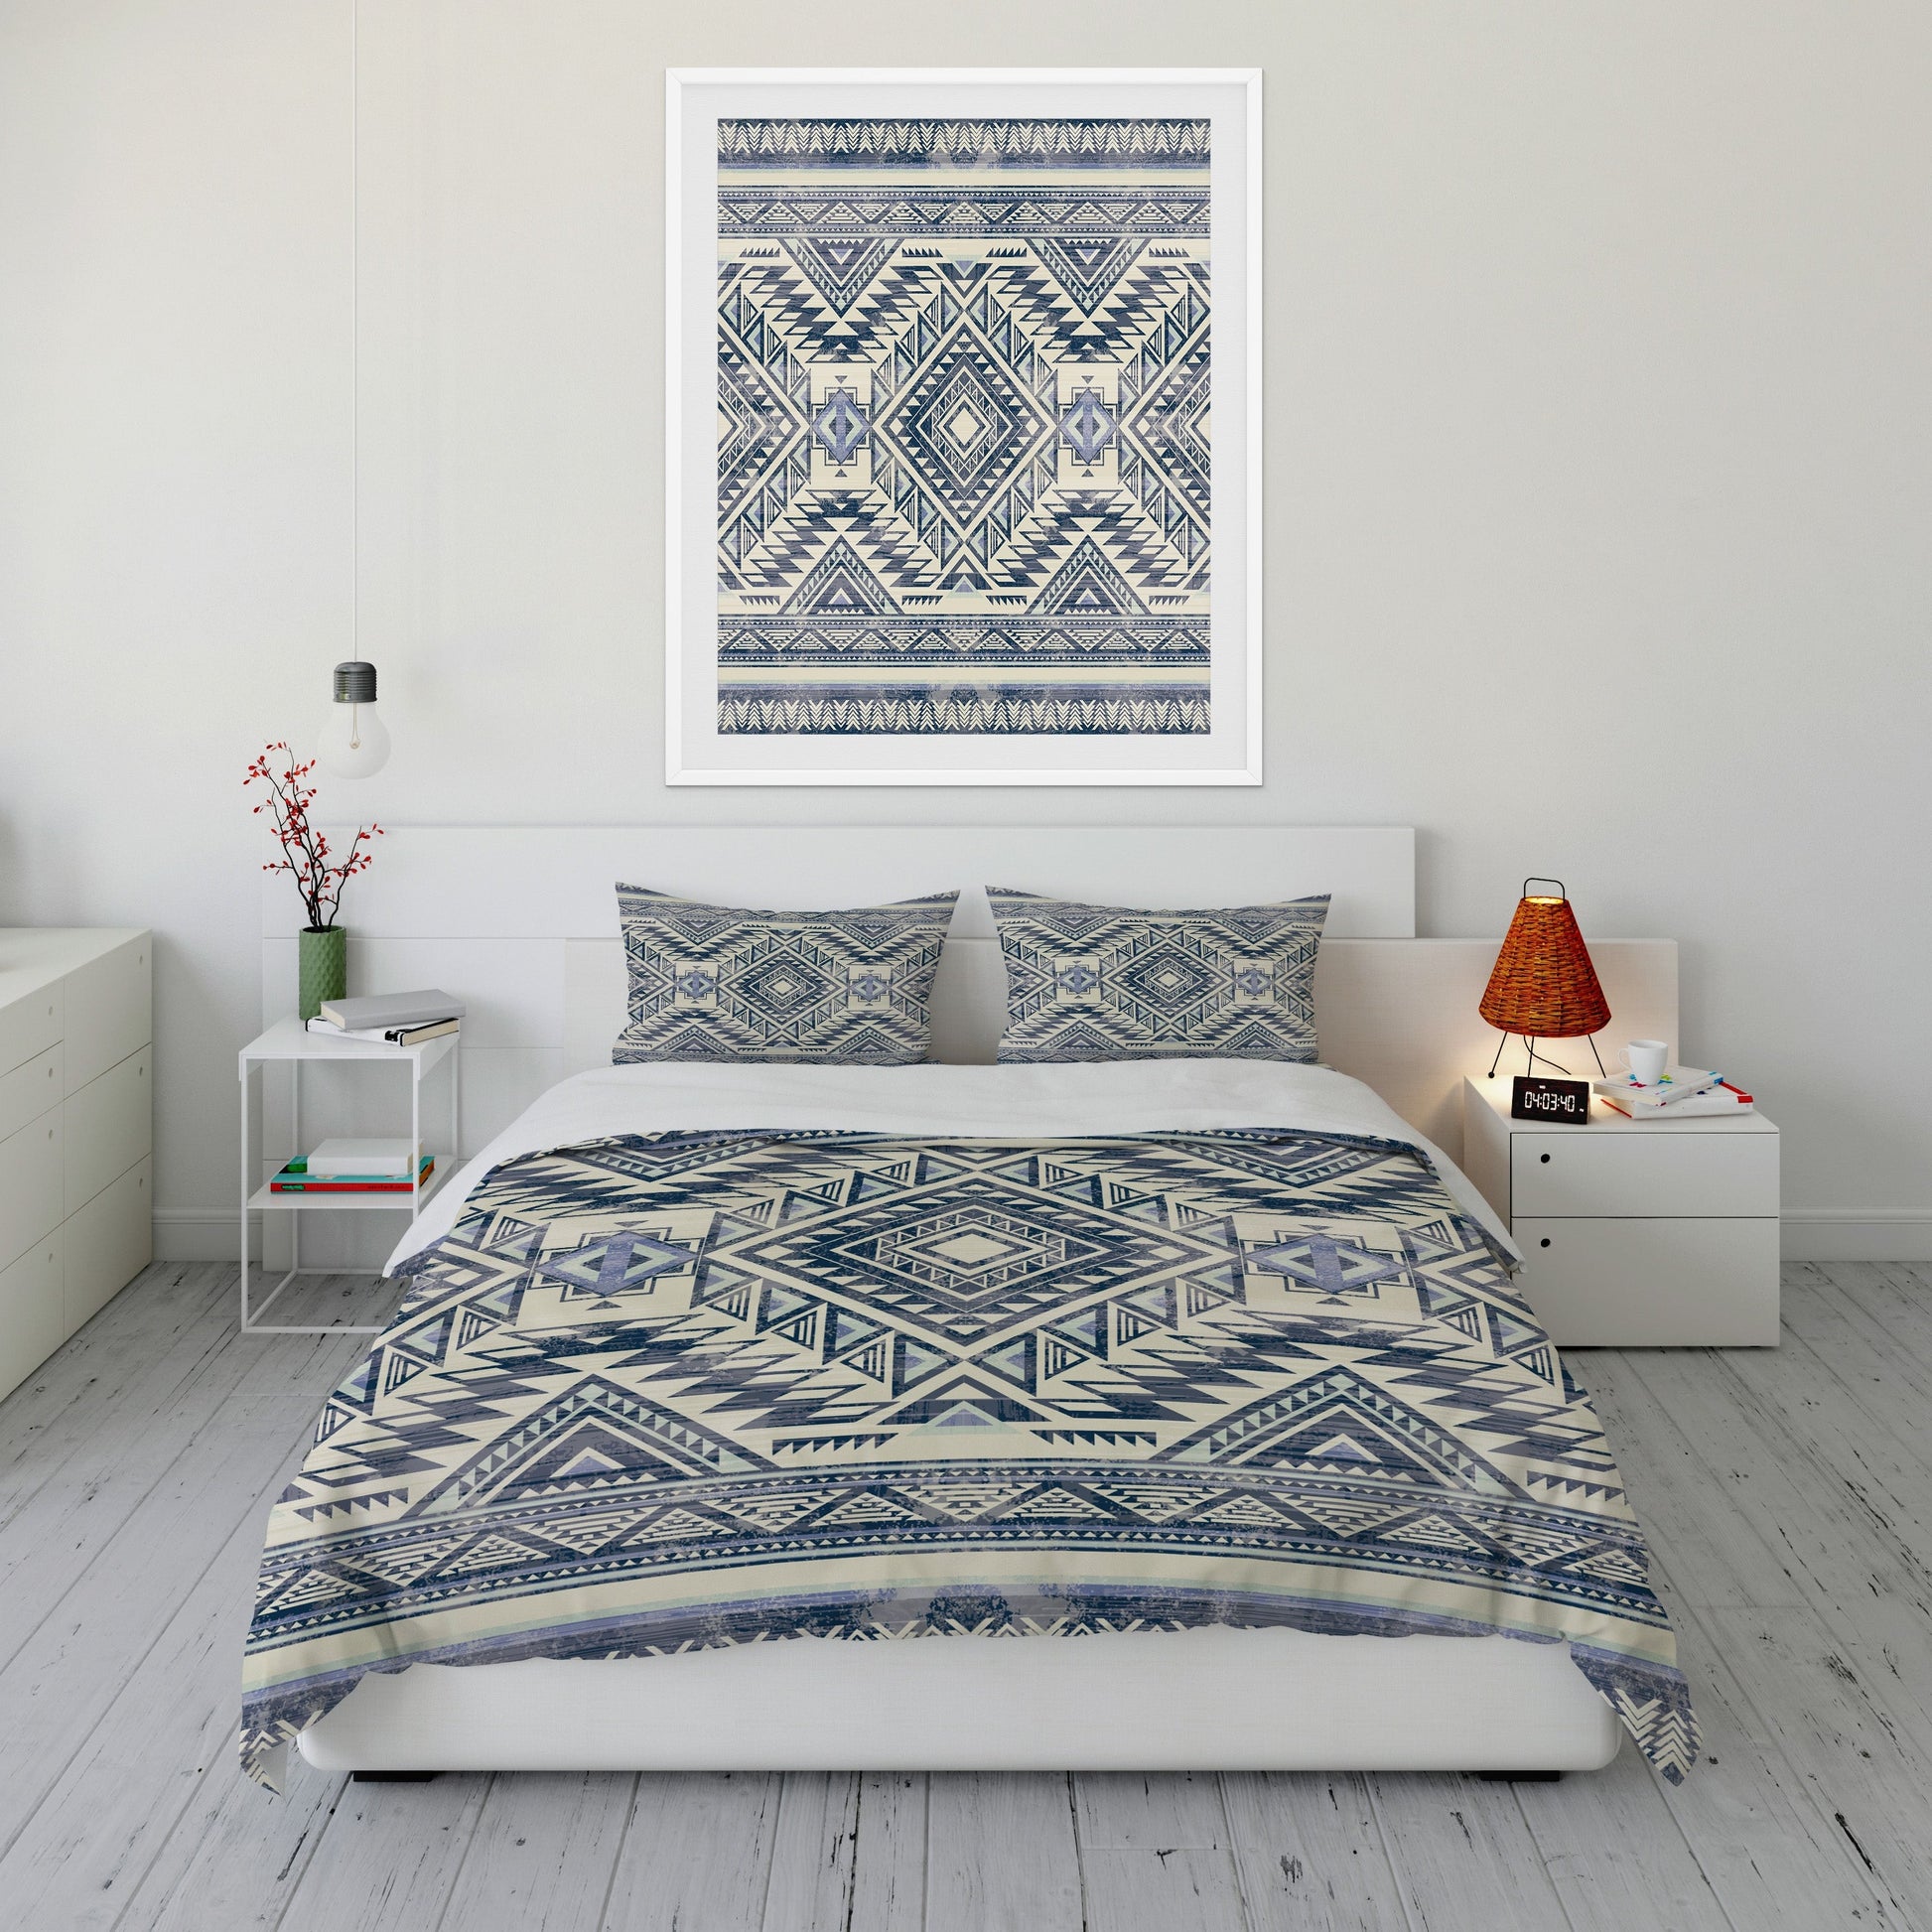 Duvet Covers with Pillowcases - Pixydecor